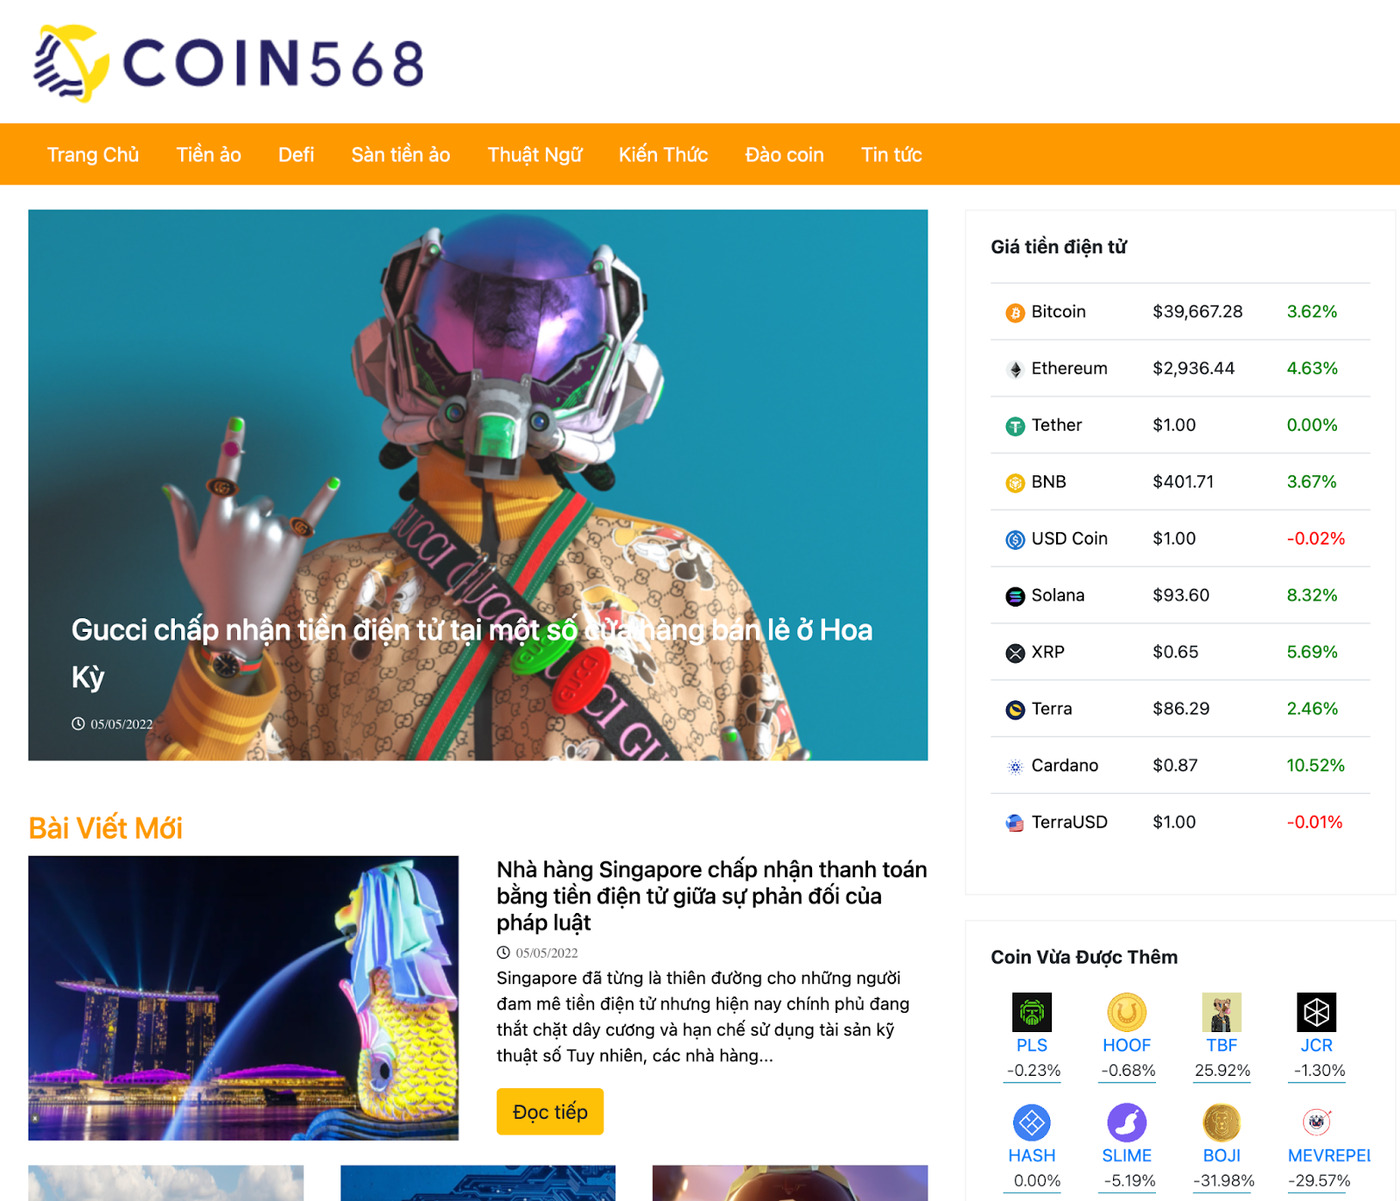 Crypto-specific News Site Officially Launched